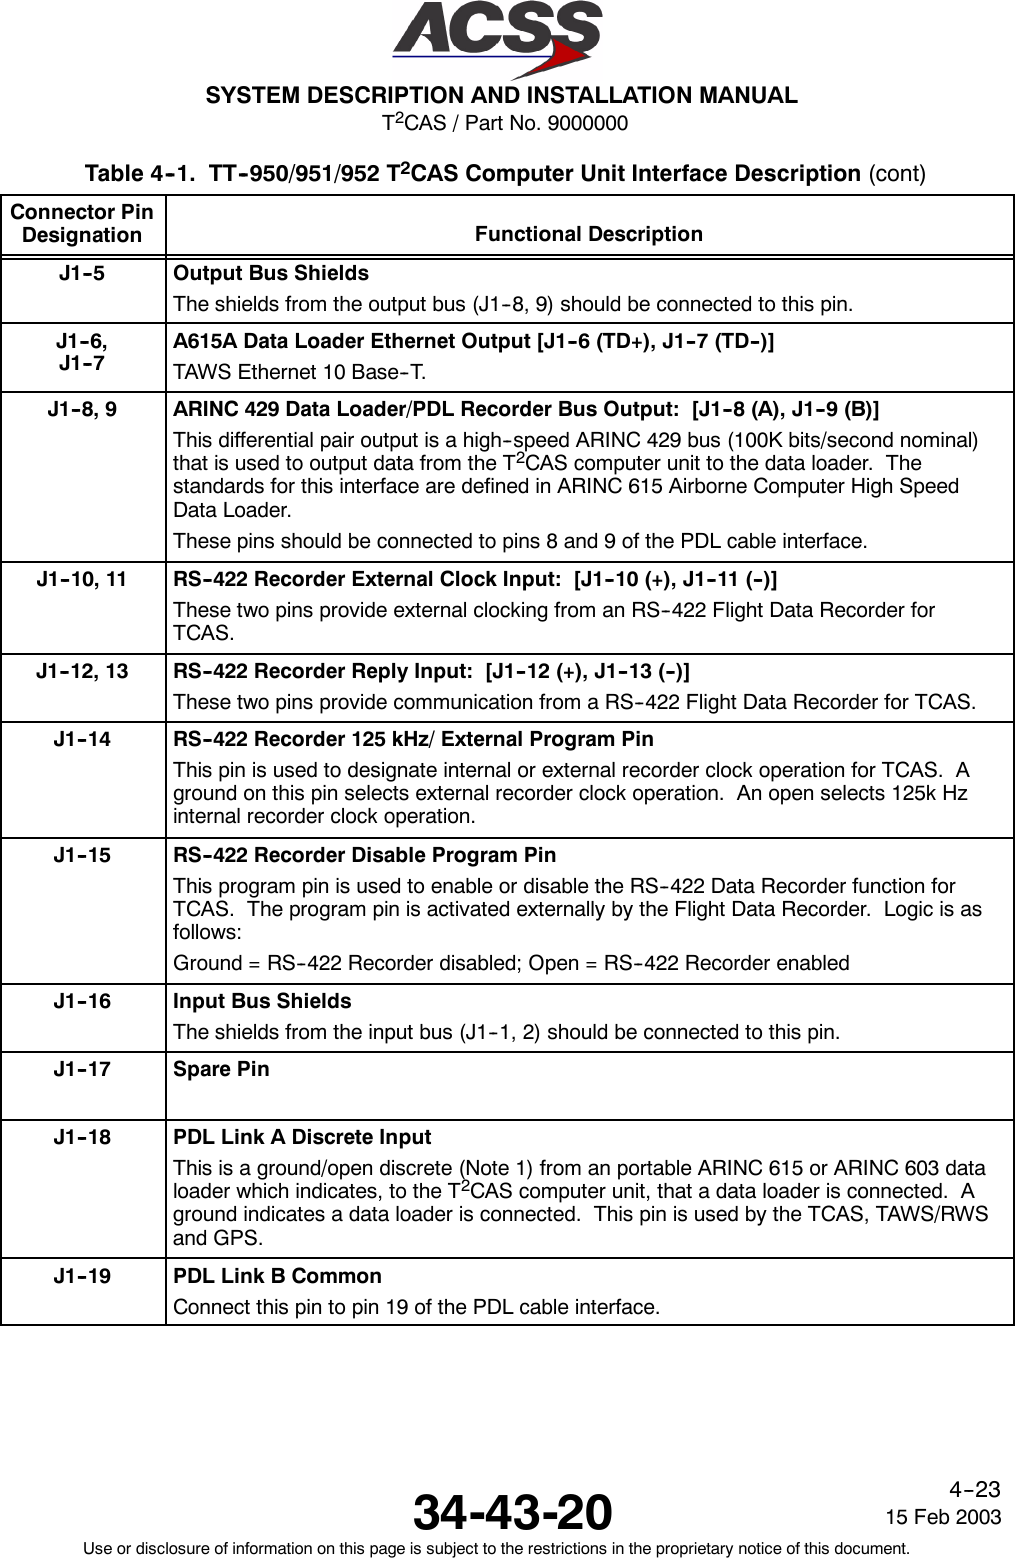 T2CAS / Part No. 9000000SYSTEM DESCRIPTION AND INSTALLATION MANUAL34-43-20 15 Feb 2003Use or disclosure of information on this page is subject to the restrictions in the proprietary notice of this document.4--23Table 4--1. TT--950/951/952 T2CAS Computer Unit Interface Description (cont)Connector PinDesignation Functional DescriptionJ1--5 Output Bus ShieldsThe shields from the output bus (J1--8, 9) should be connected to this pin.J1--6,J1--7A615A Data Loader Ethernet Output [J1--6 (TD+), J1--7 (TD--)]TAWS Ethernet 10 Base--T.J1--8, 9 ARINC 429 Data Loader/PDL Recorder Bus Output: [J1--8 (A), J1--9 (B)]This differential pair output is a high--speed ARINC 429 bus (100K bits/second nominal)that is used to output data from the T2CAS computer unit to the data loader. Thestandards for this interface are defined in ARINC 615 Airborne Computer High SpeedData Loader.These pins should be connected to pins 8 and 9 of the PDL cable interface.J1--10, 11 RS--422 Recorder External Clock Input: [J1--10 (+), J1--11 (--)]These two pins provide external clocking from an RS--422 Flight Data Recorder forTCAS.J1--12, 13 RS--422 Recorder Reply Input: [J1--12 (+), J1--13 (--)]These two pins provide communication from a RS--422 Flight Data Recorder for TCAS.J1--14 RS--422 Recorder 125 kHz/ External Program PinThis pin is used to designate internal or external recorder clock operation for TCAS. Aground on this pin selects external recorder clock operation. An open selects 125k Hzinternal recorder clock operation.J1--15 RS--422 Recorder Disable Program PinThis program pin is used to enable or disable the RS--422 Data Recorder function forTCAS. The program pin is activated externally by the Flight Data Recorder. Logic is asfollows:Ground = RS--422 Recorder disabled; Open = RS--422 Recorder enabledJ1--16 Input Bus ShieldsThe shields from the input bus (J1--1, 2) should be connected to this pin.J1--17 Spare PinJ1--18 PDL Link A Discrete InputThis is a ground/open discrete (Note 1) from an portable ARINC 615 or ARINC 603 dataloader which indicates, to the T2CAS computer unit, that a data loader is connected. Aground indicates a data loader is connected. This pin is used by the TCAS, TAWS/RWSand GPS.J1--19 PDL Link B CommonConnect this pin to pin 19 of the PDL cable interface.